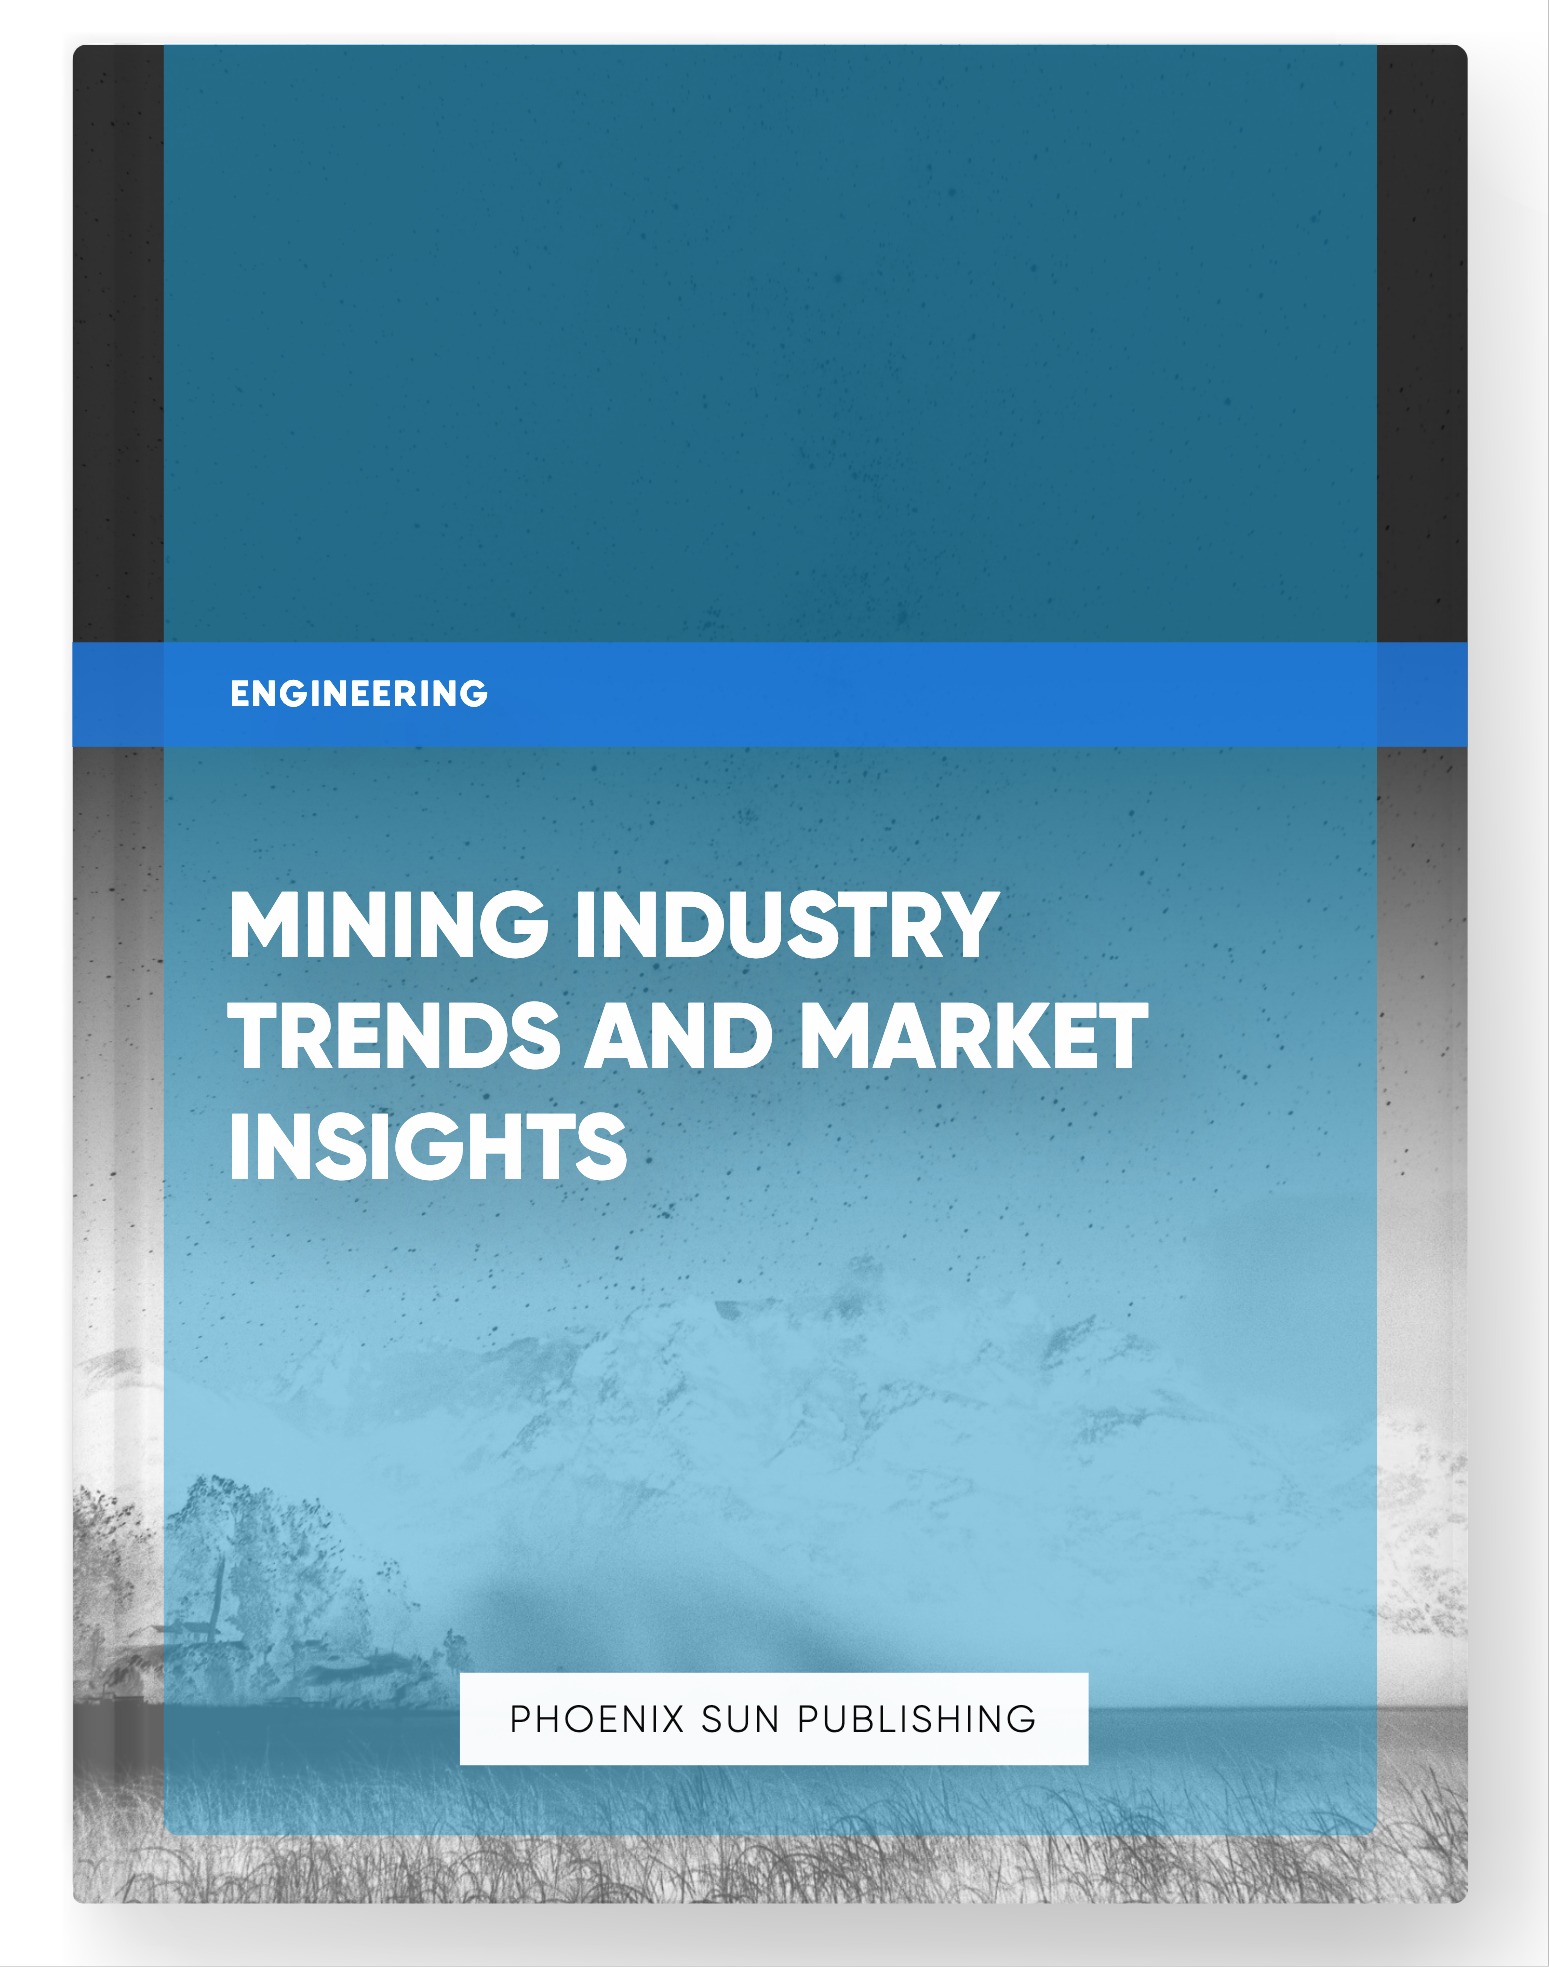 Mining Industry Trends and Market Insights